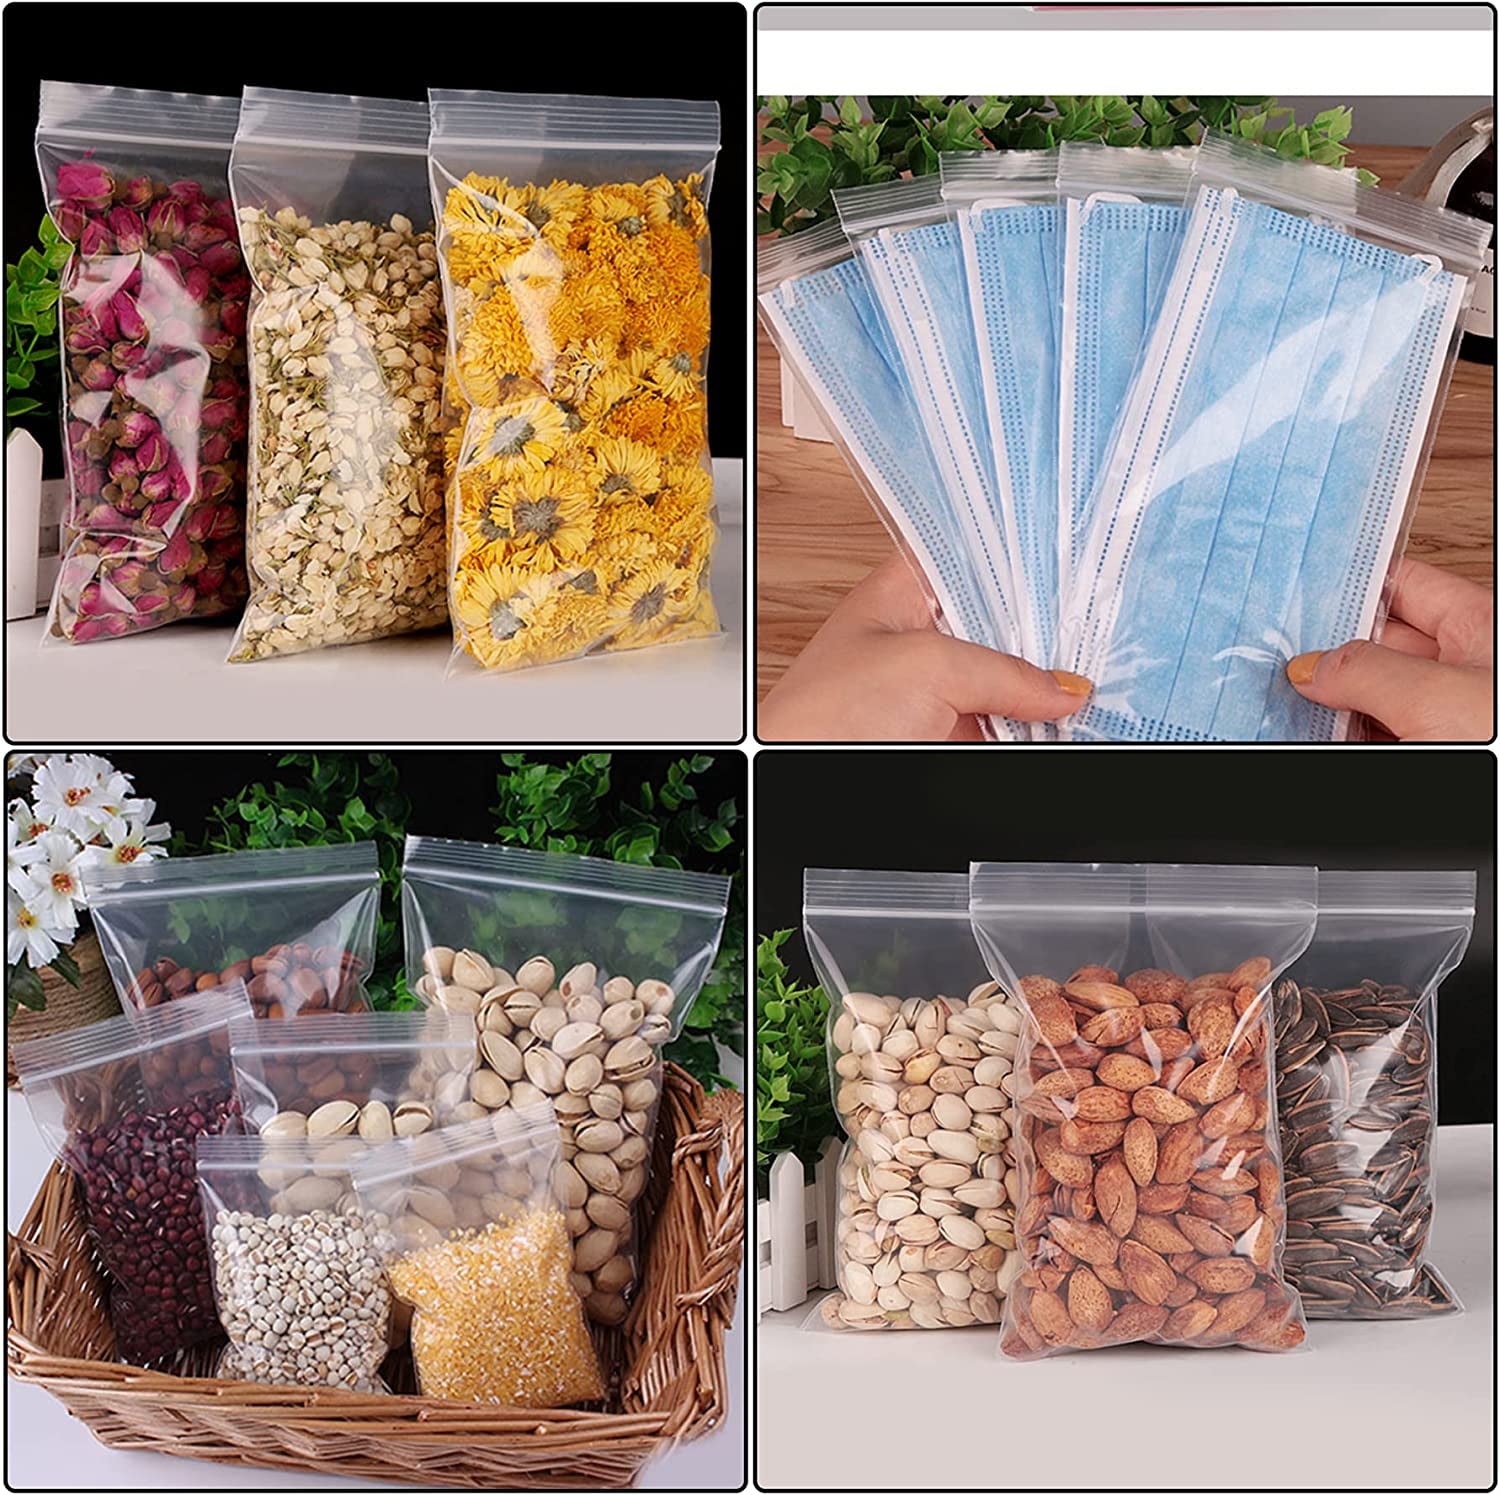 Large ZIP LOCK BAG Sizes Large 14 x 20 Resealable Plastic Bags (100pcs)  Local High Quality Special PROMO!